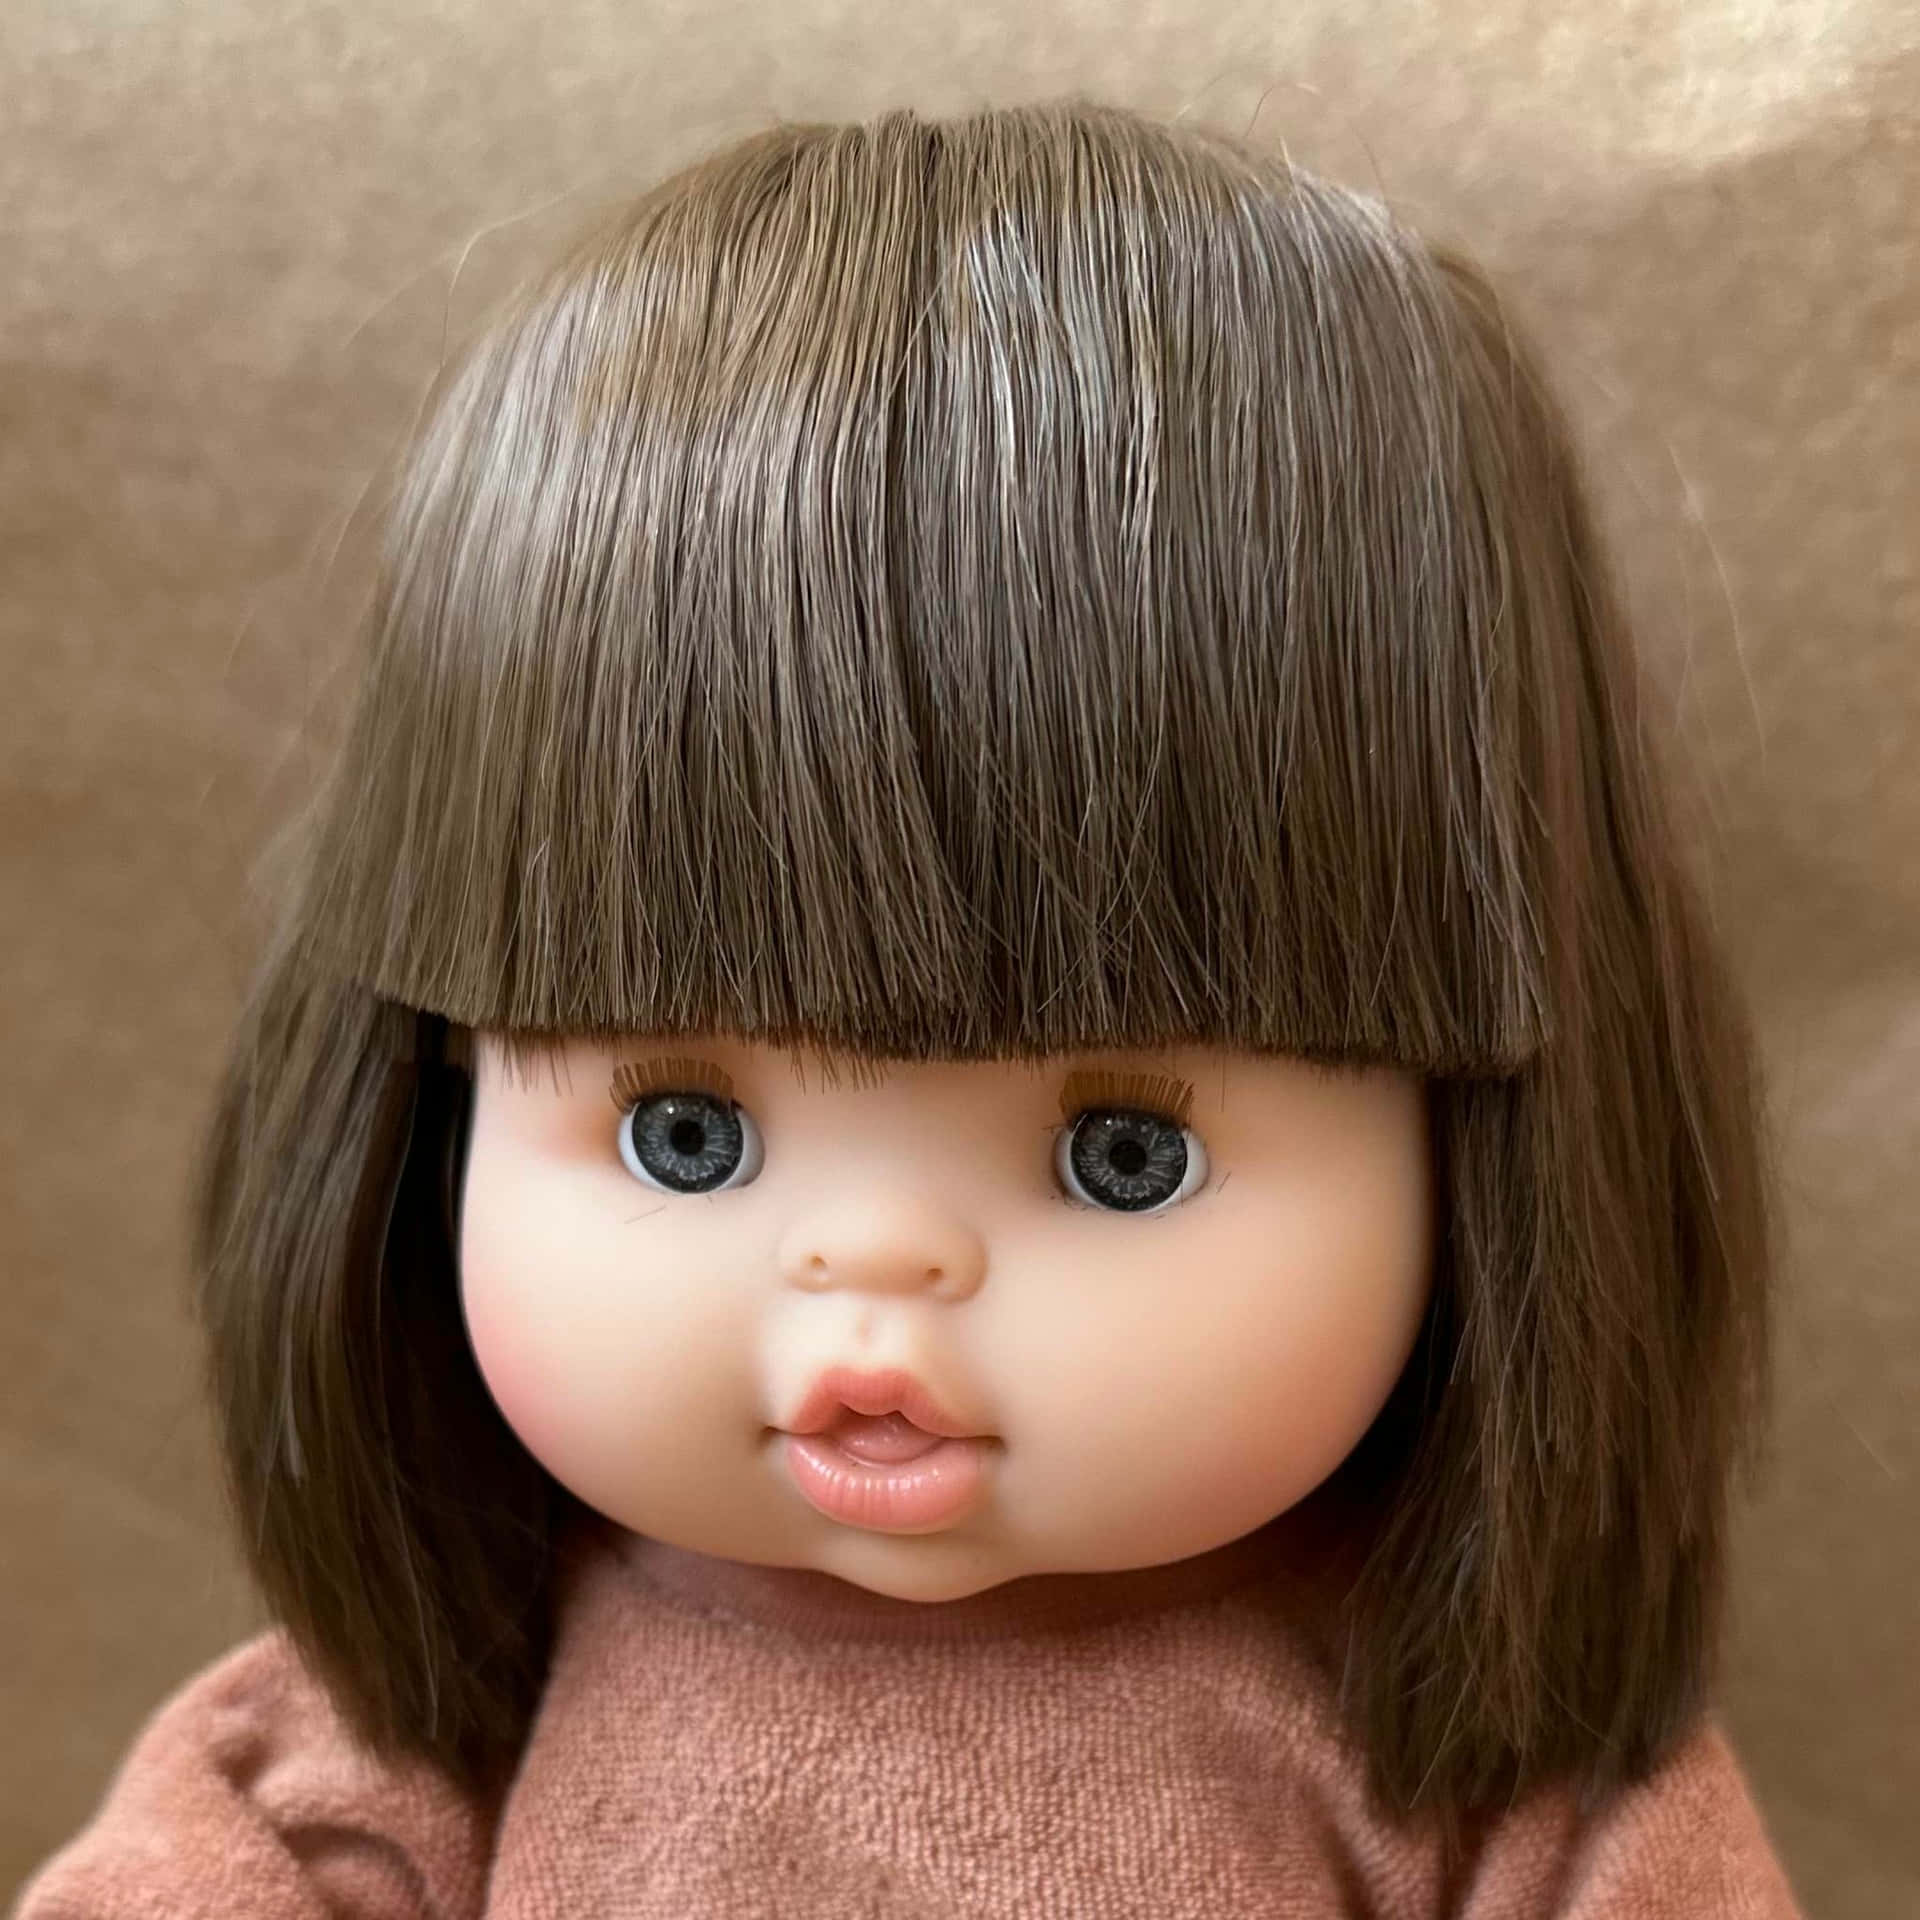 A Doll With Brown Hair And Brown Eyes